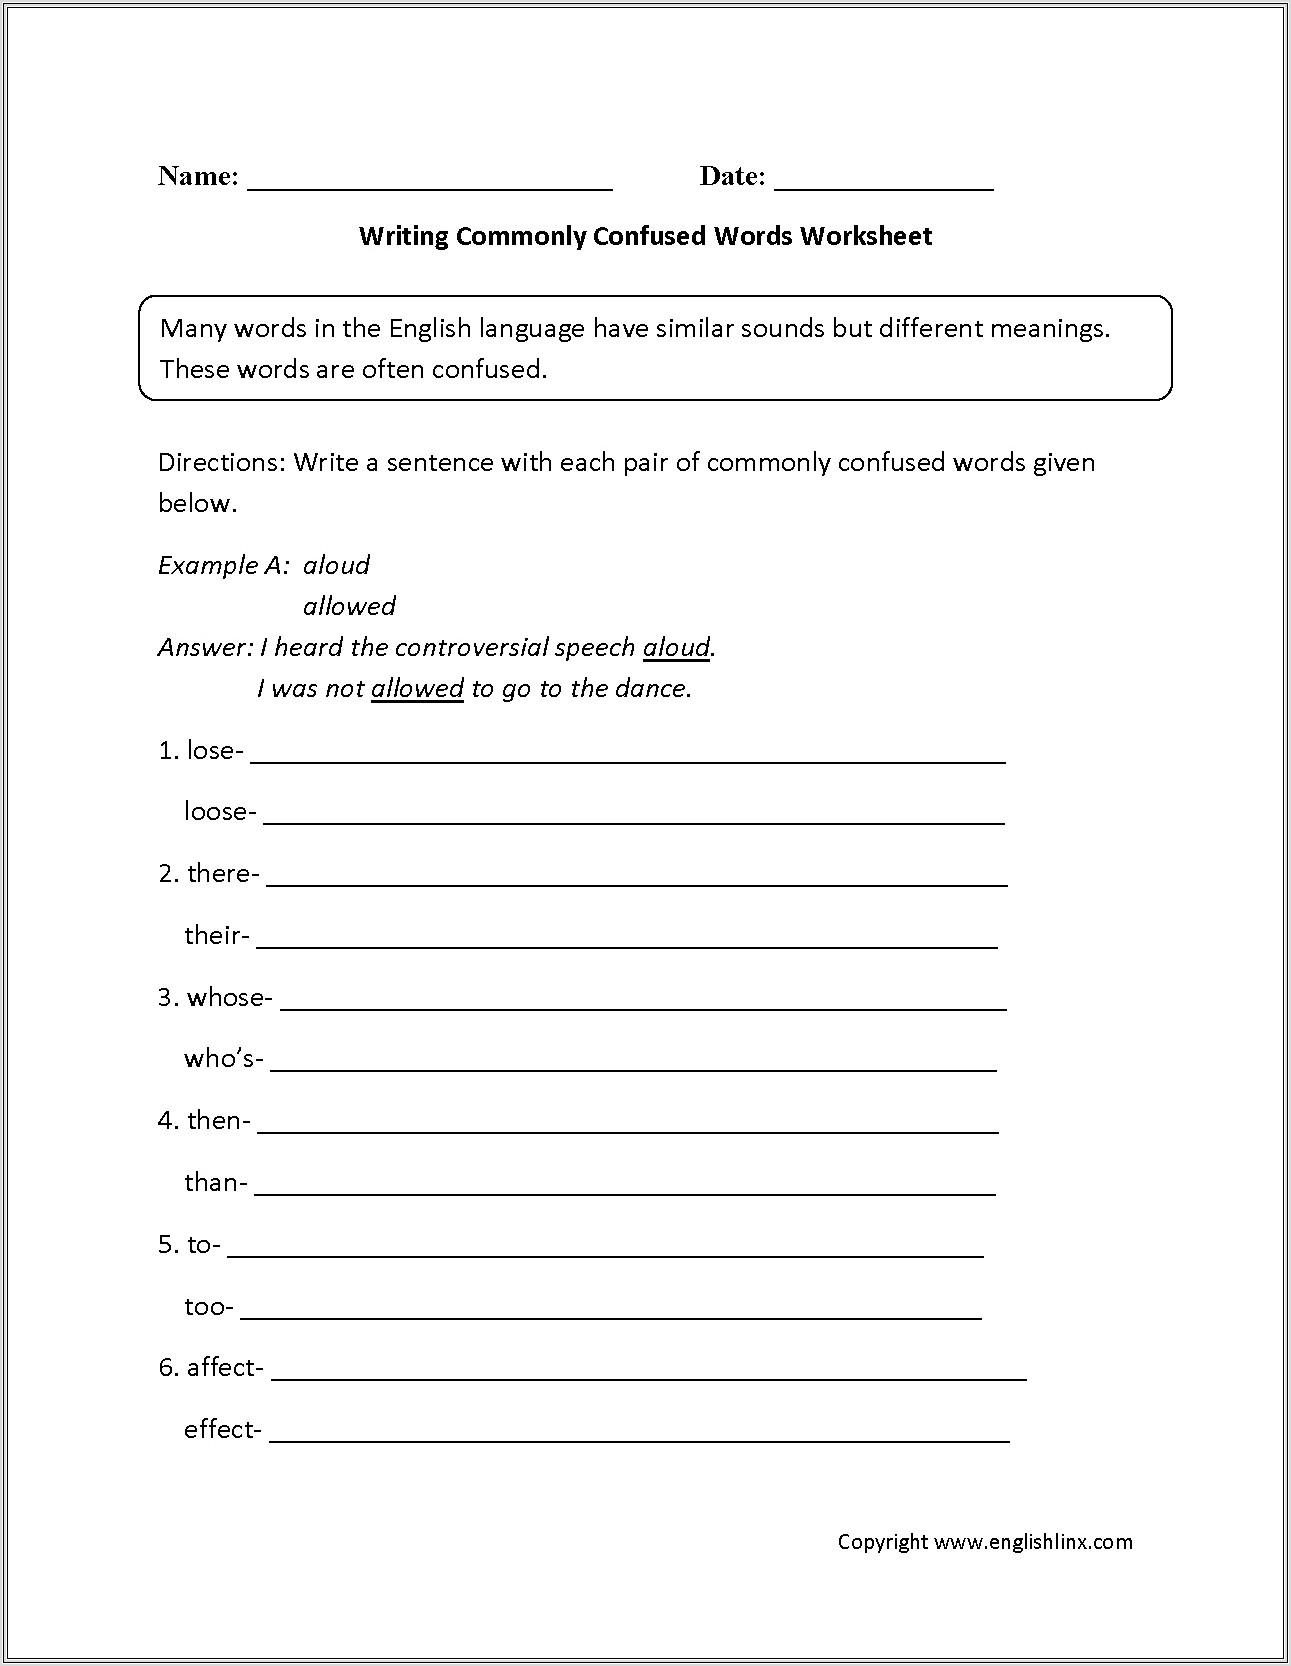 Commonly Confused Words Worksheet With Answers